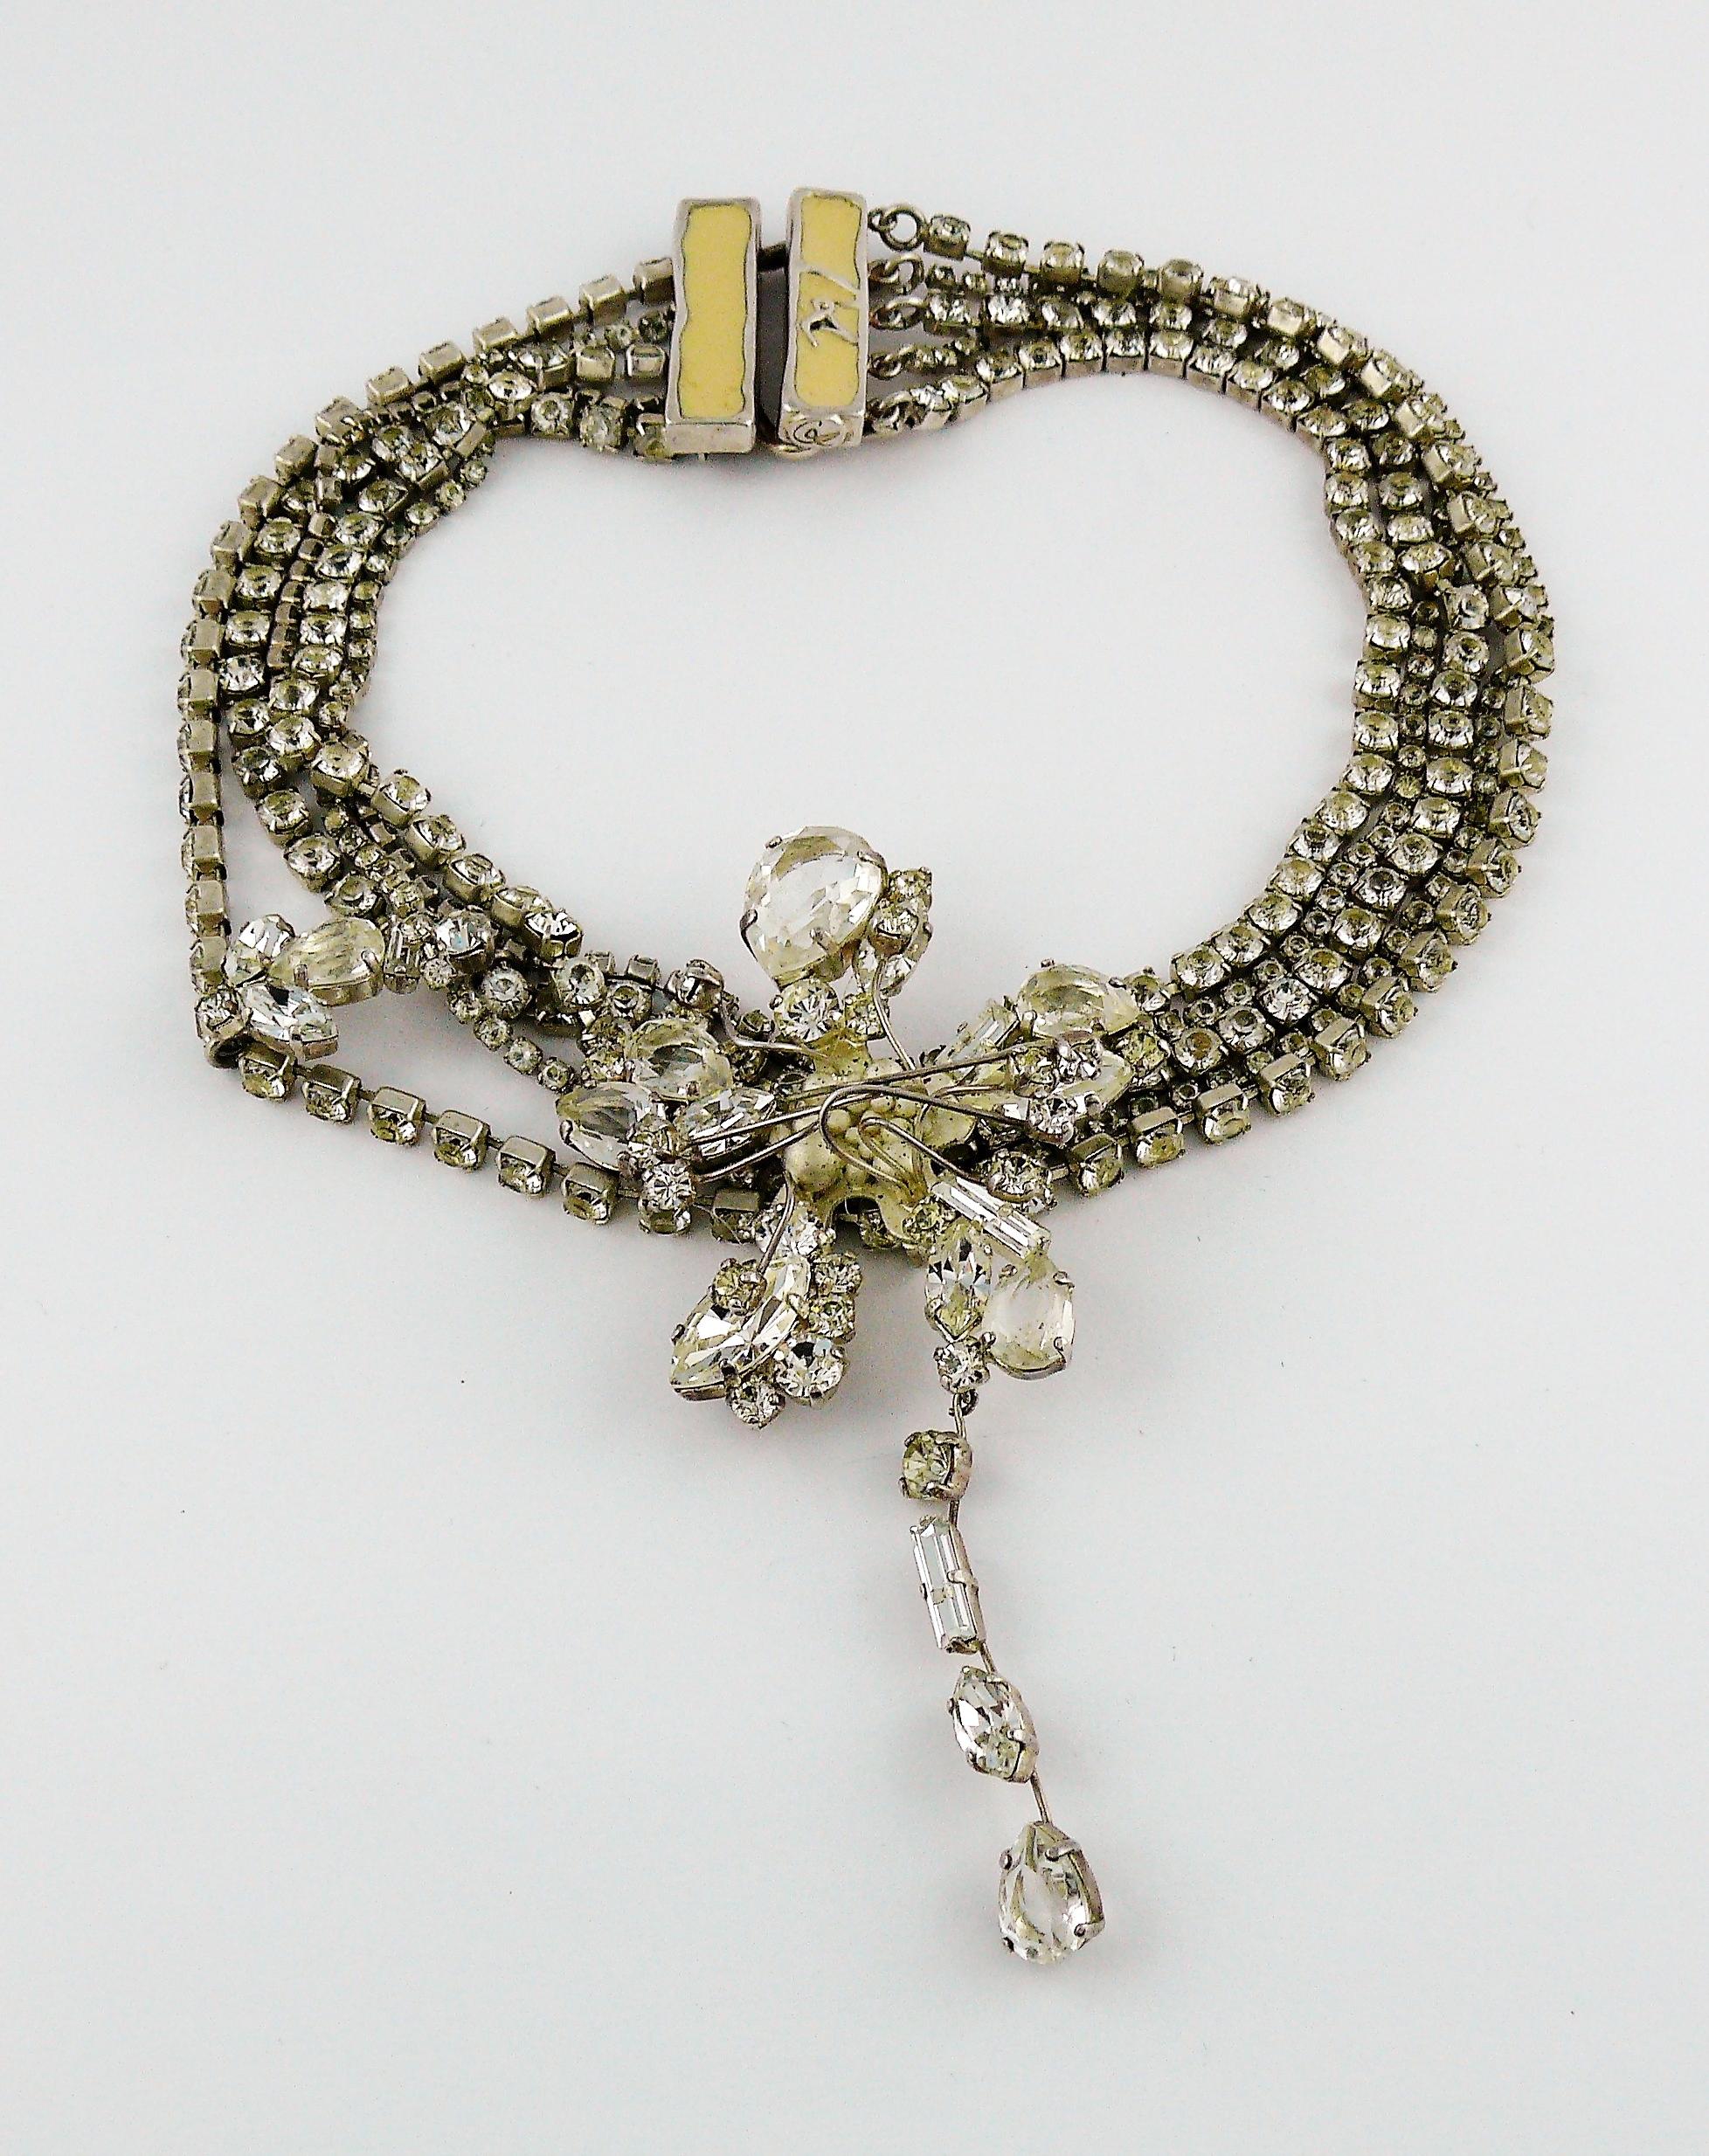 CHRISTIAN LACROIX vintage silver toned necklace embellished with clear crystals and a stylized flower.

Hook clasp closure.
Please note that some chains are intertwined from original manufacturing.

Embossed CL on the clasp.

Indicative measurements